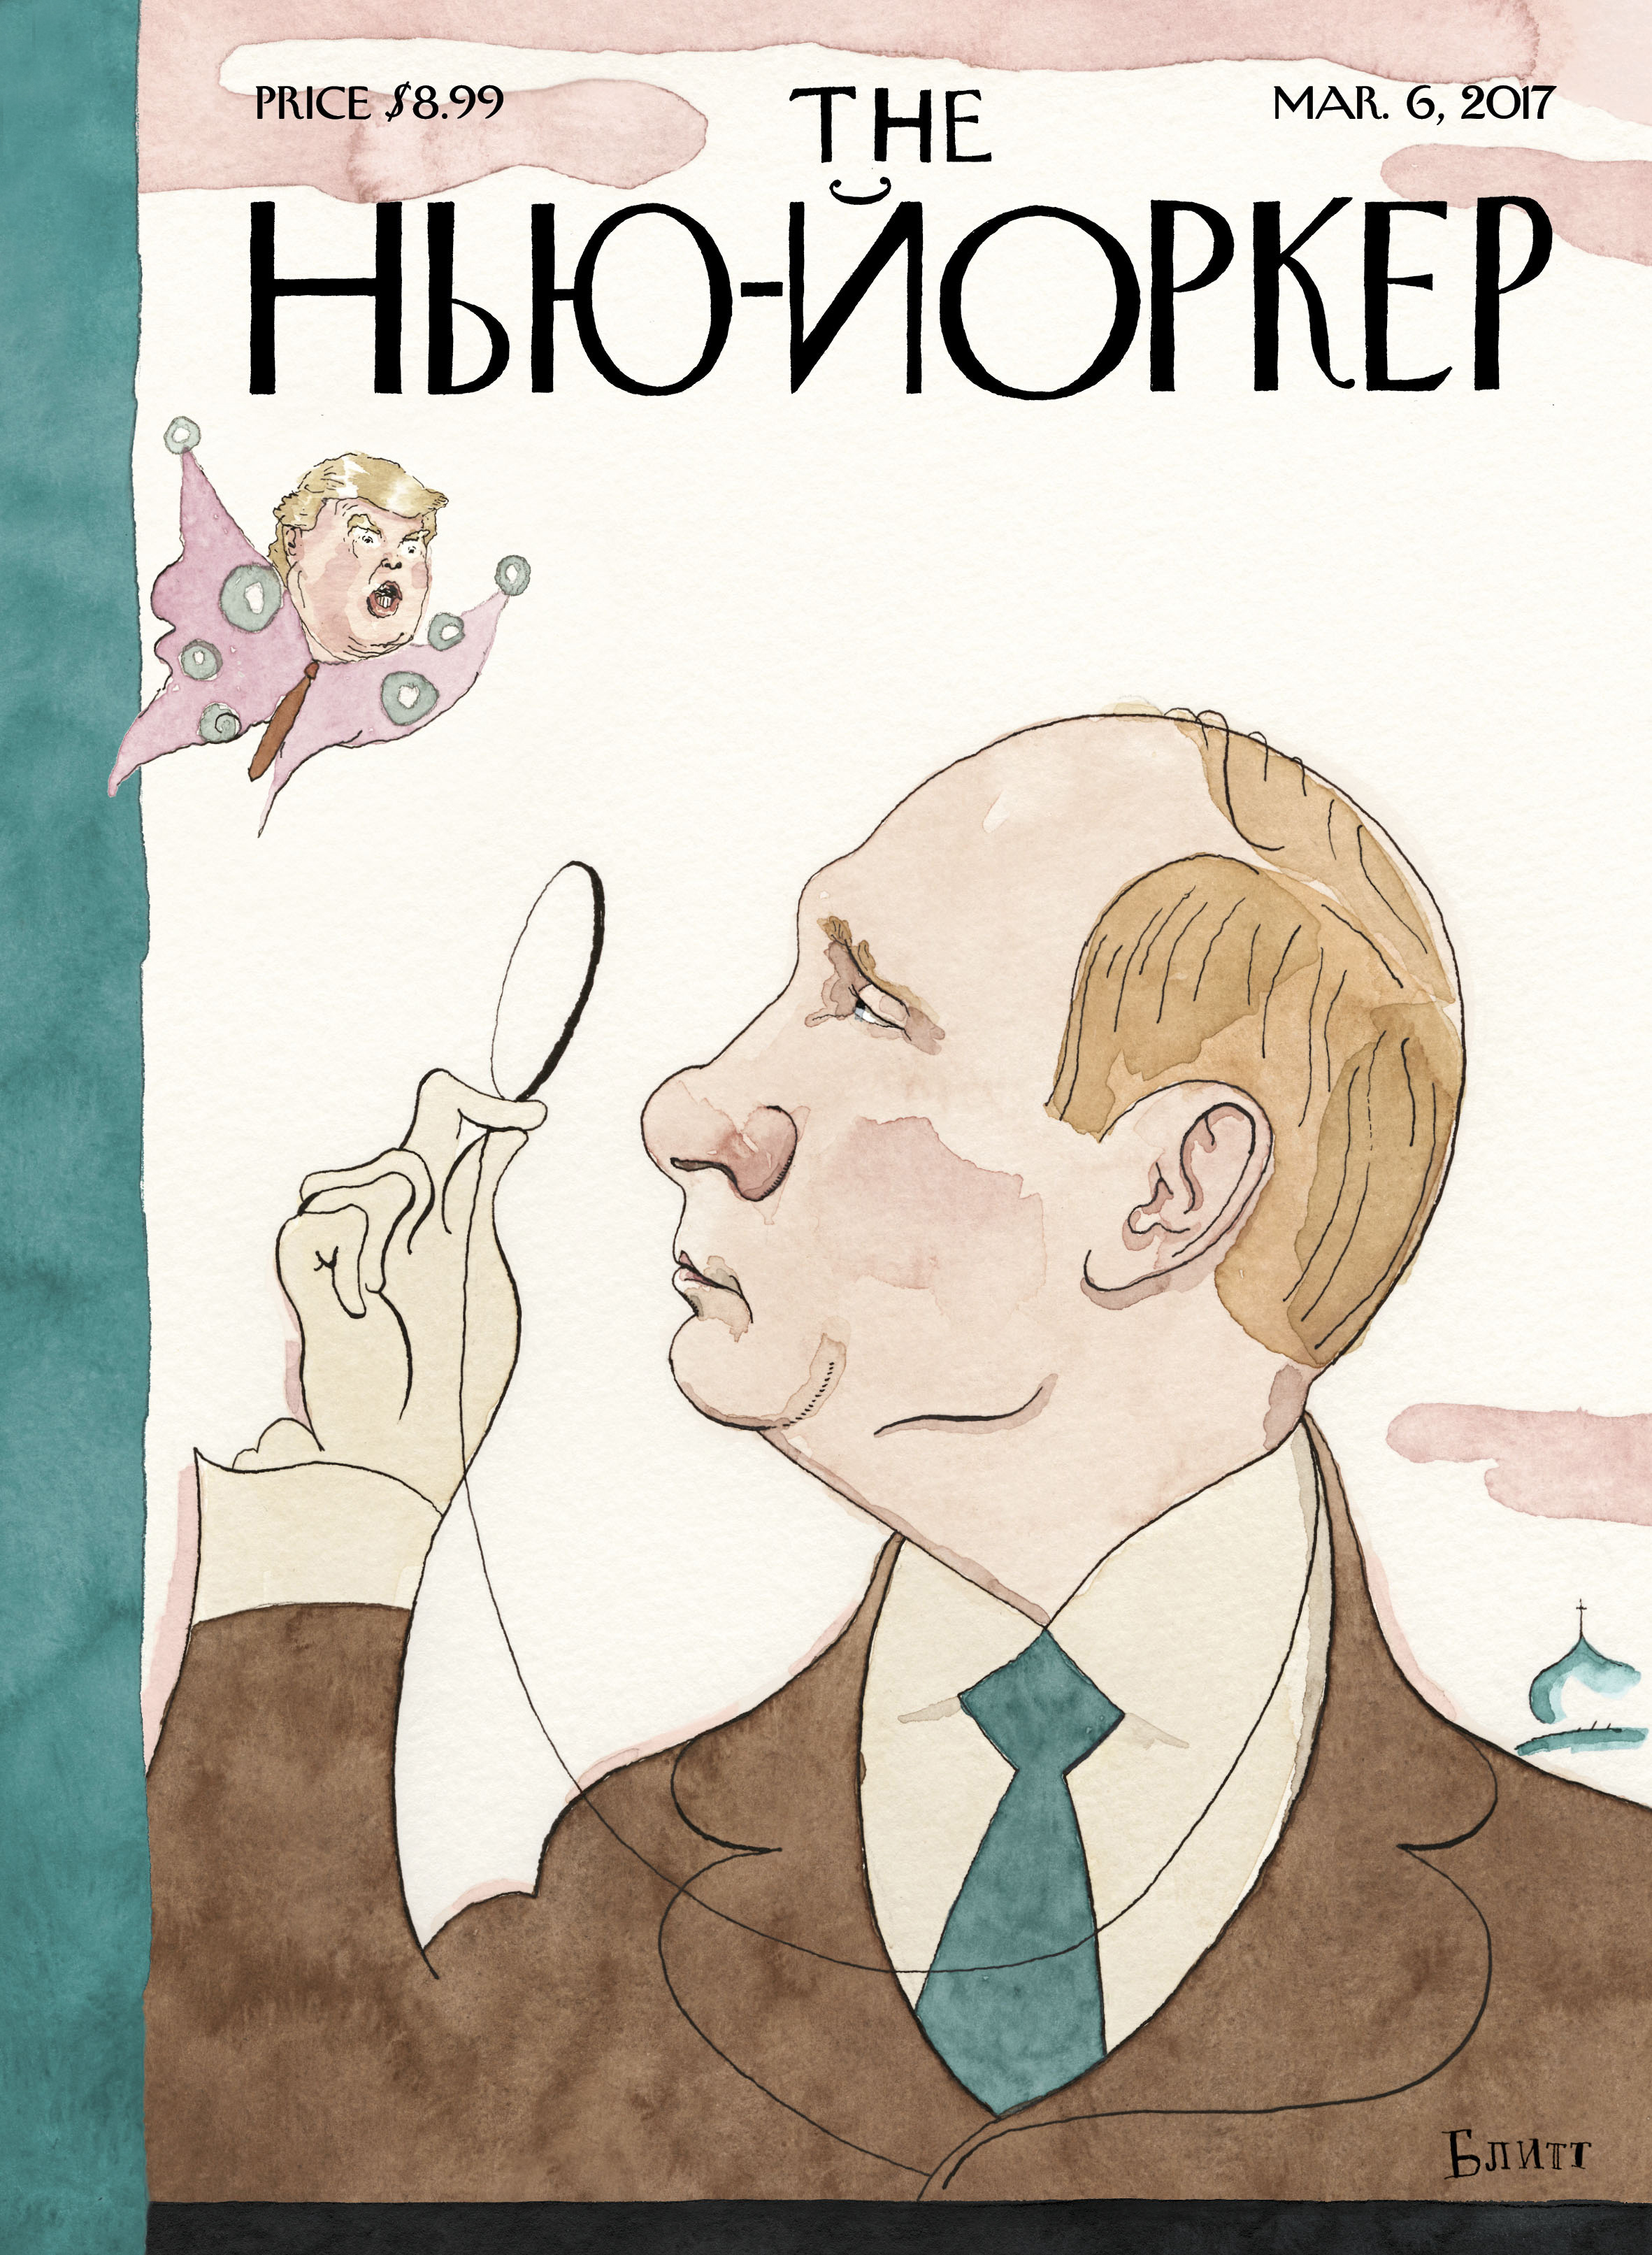 The New Yorker - “Eustace Vladimirovich Tilley,” March 6, 2017